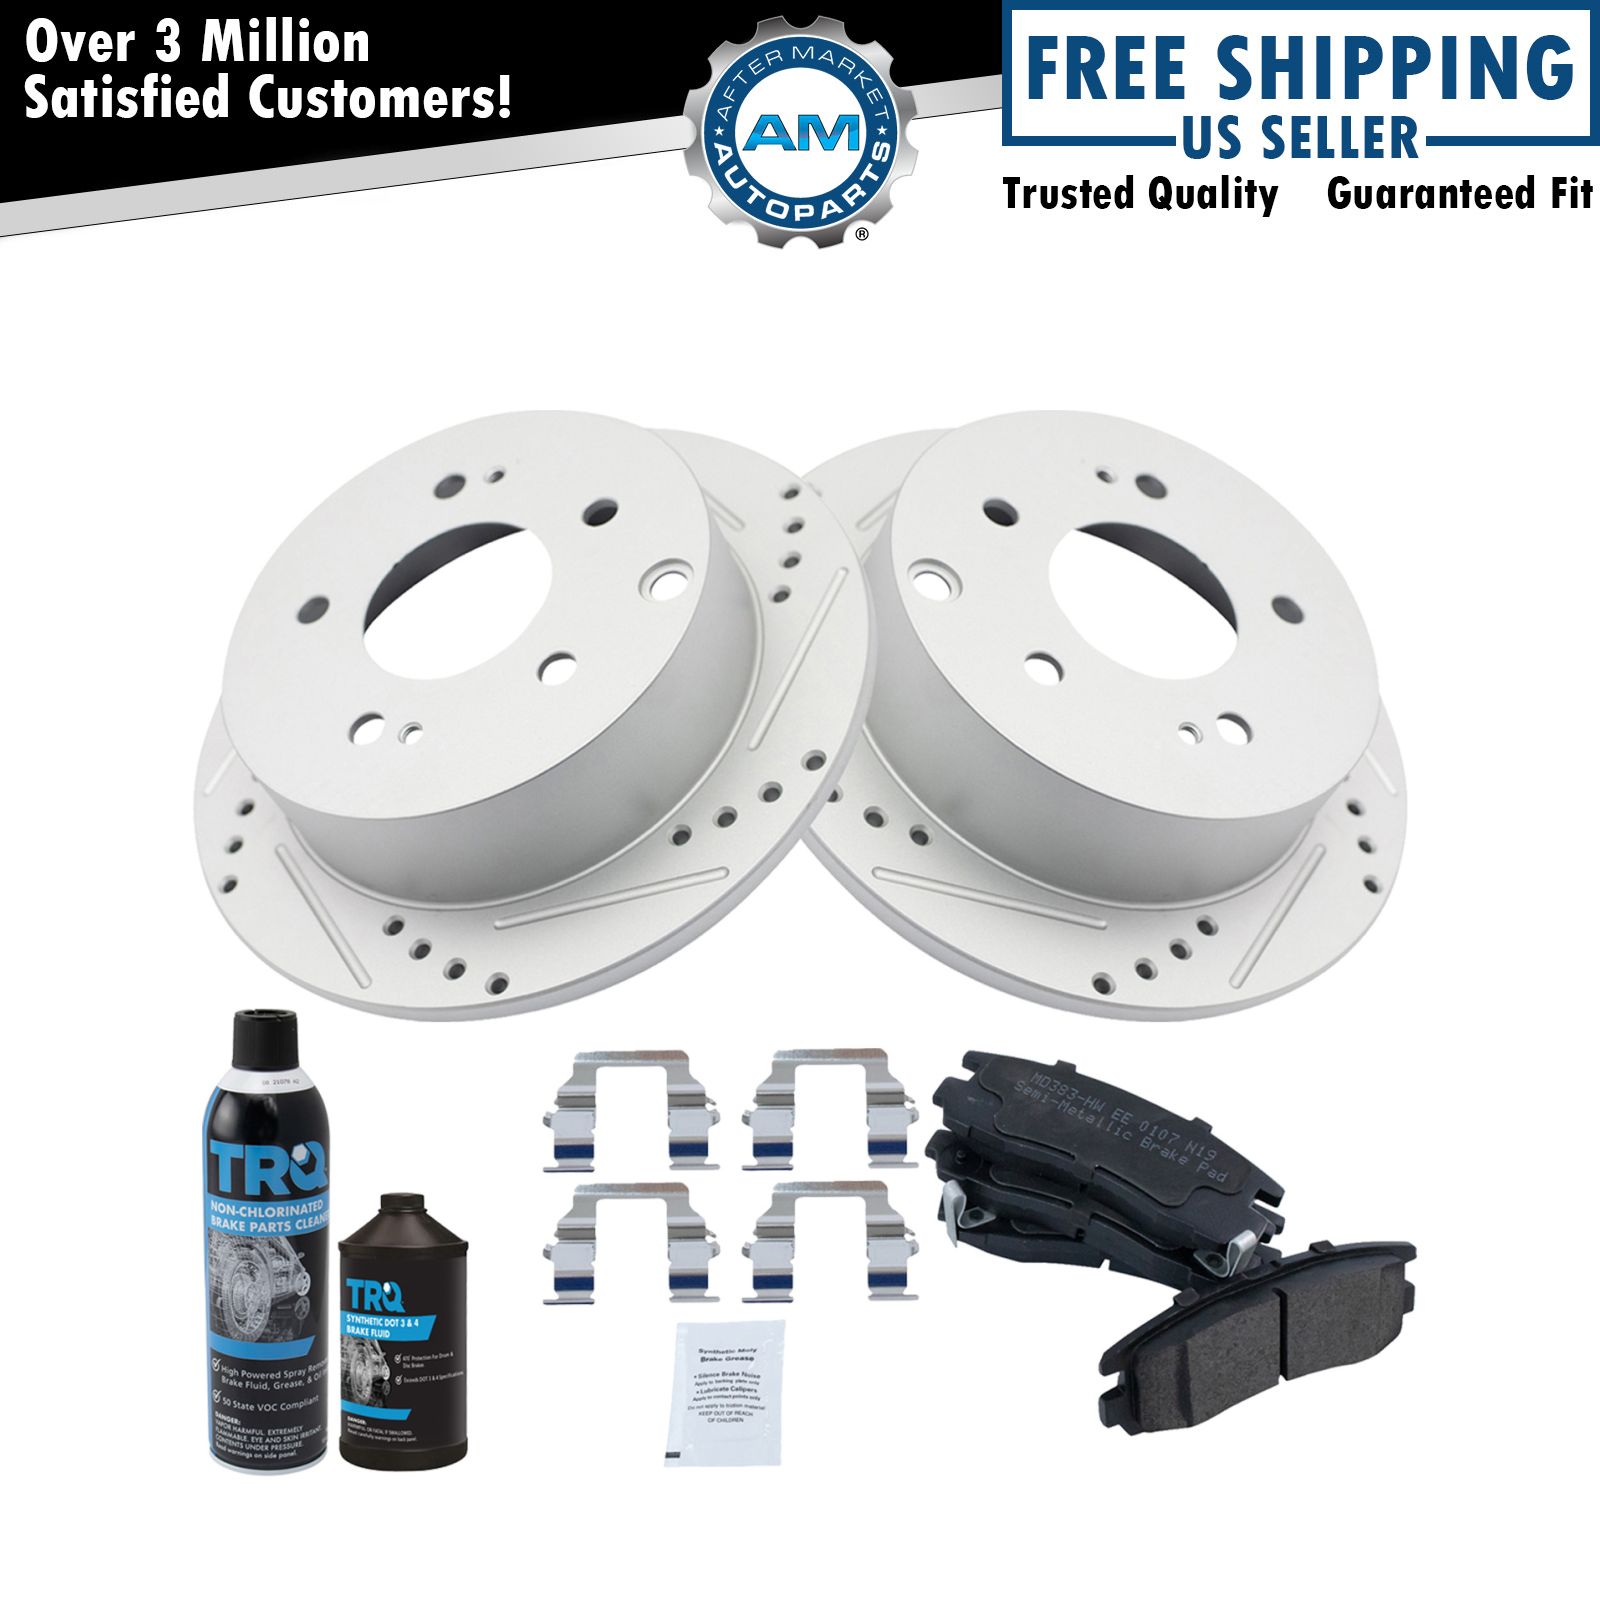 Rear Brake Pad & Performance Rotor Kit w/Chemicals for Eclipse Galant